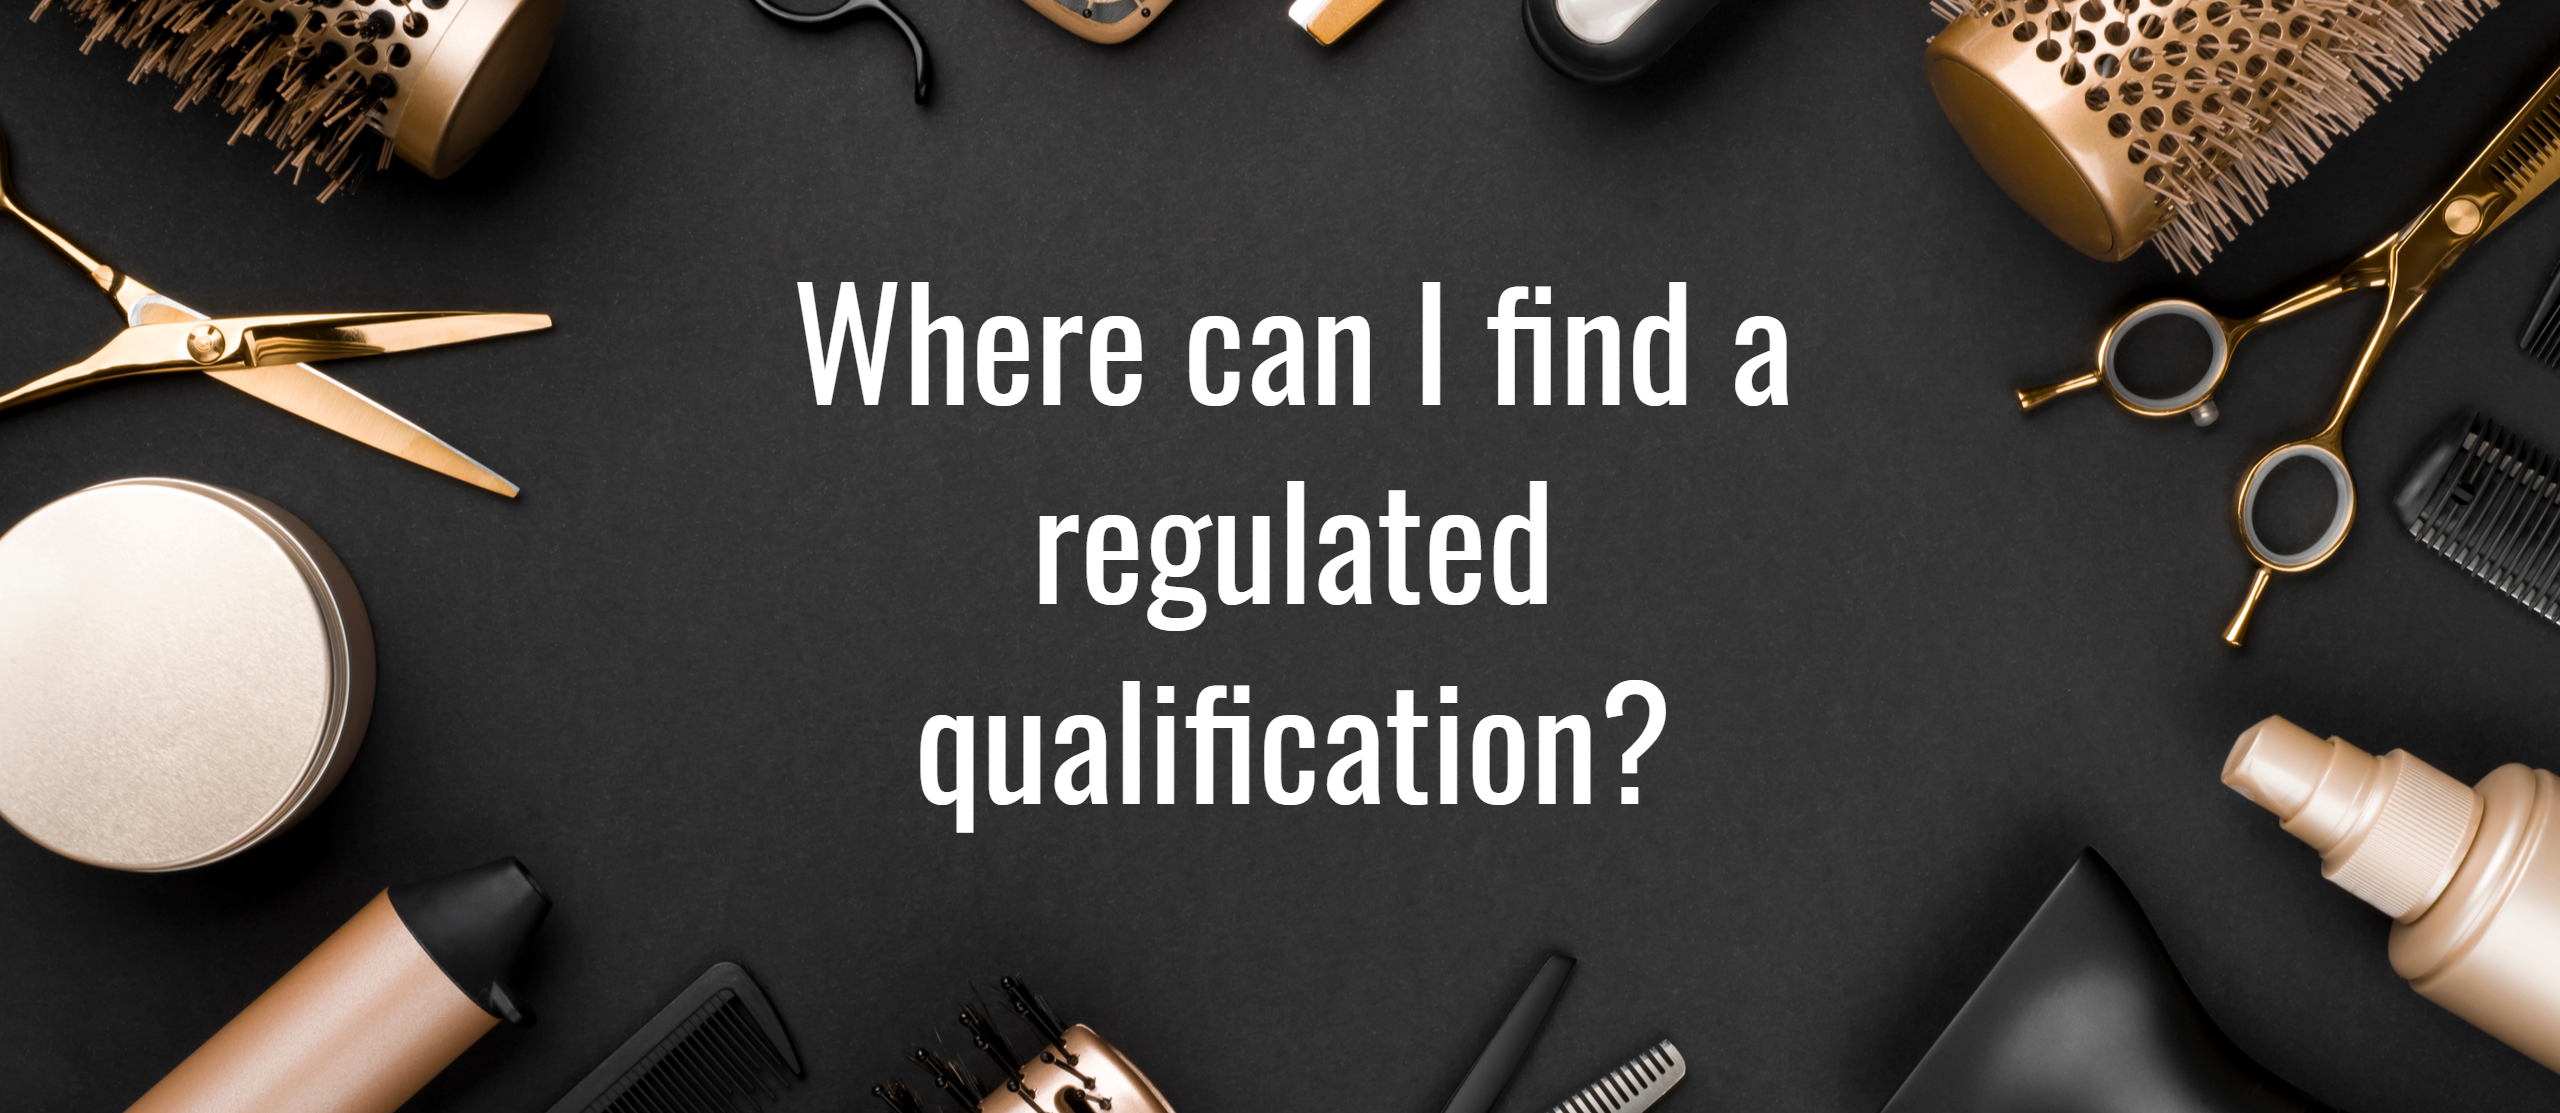 Where can i find a regulated qualification?